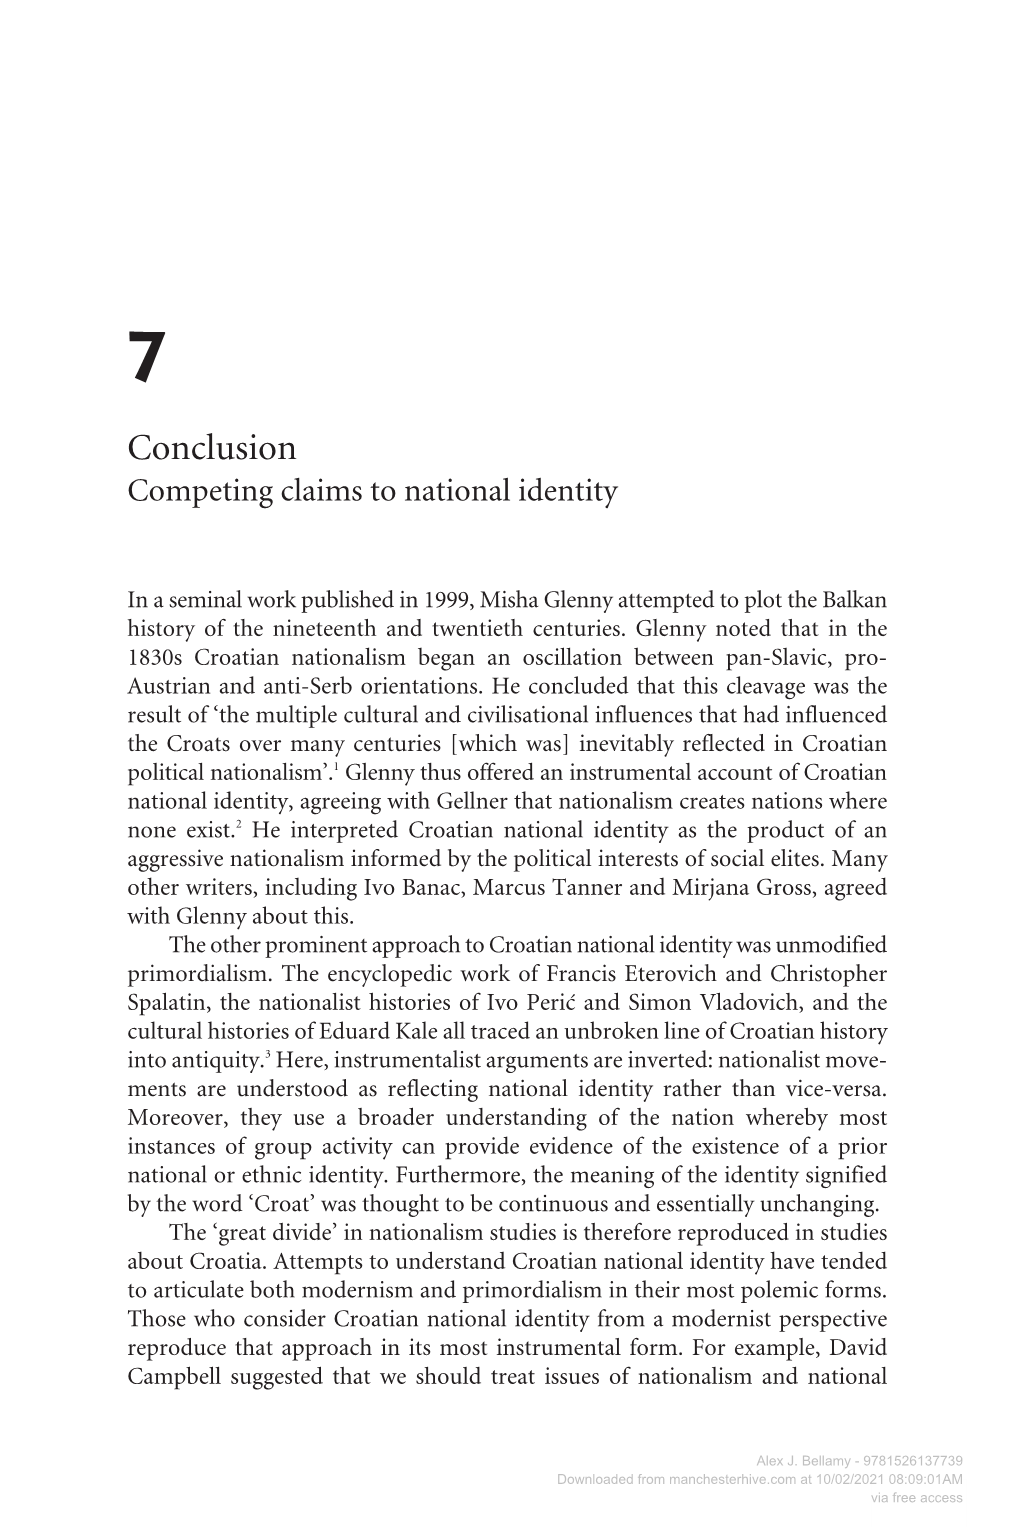 Conclusion Competing Claims to National Identity